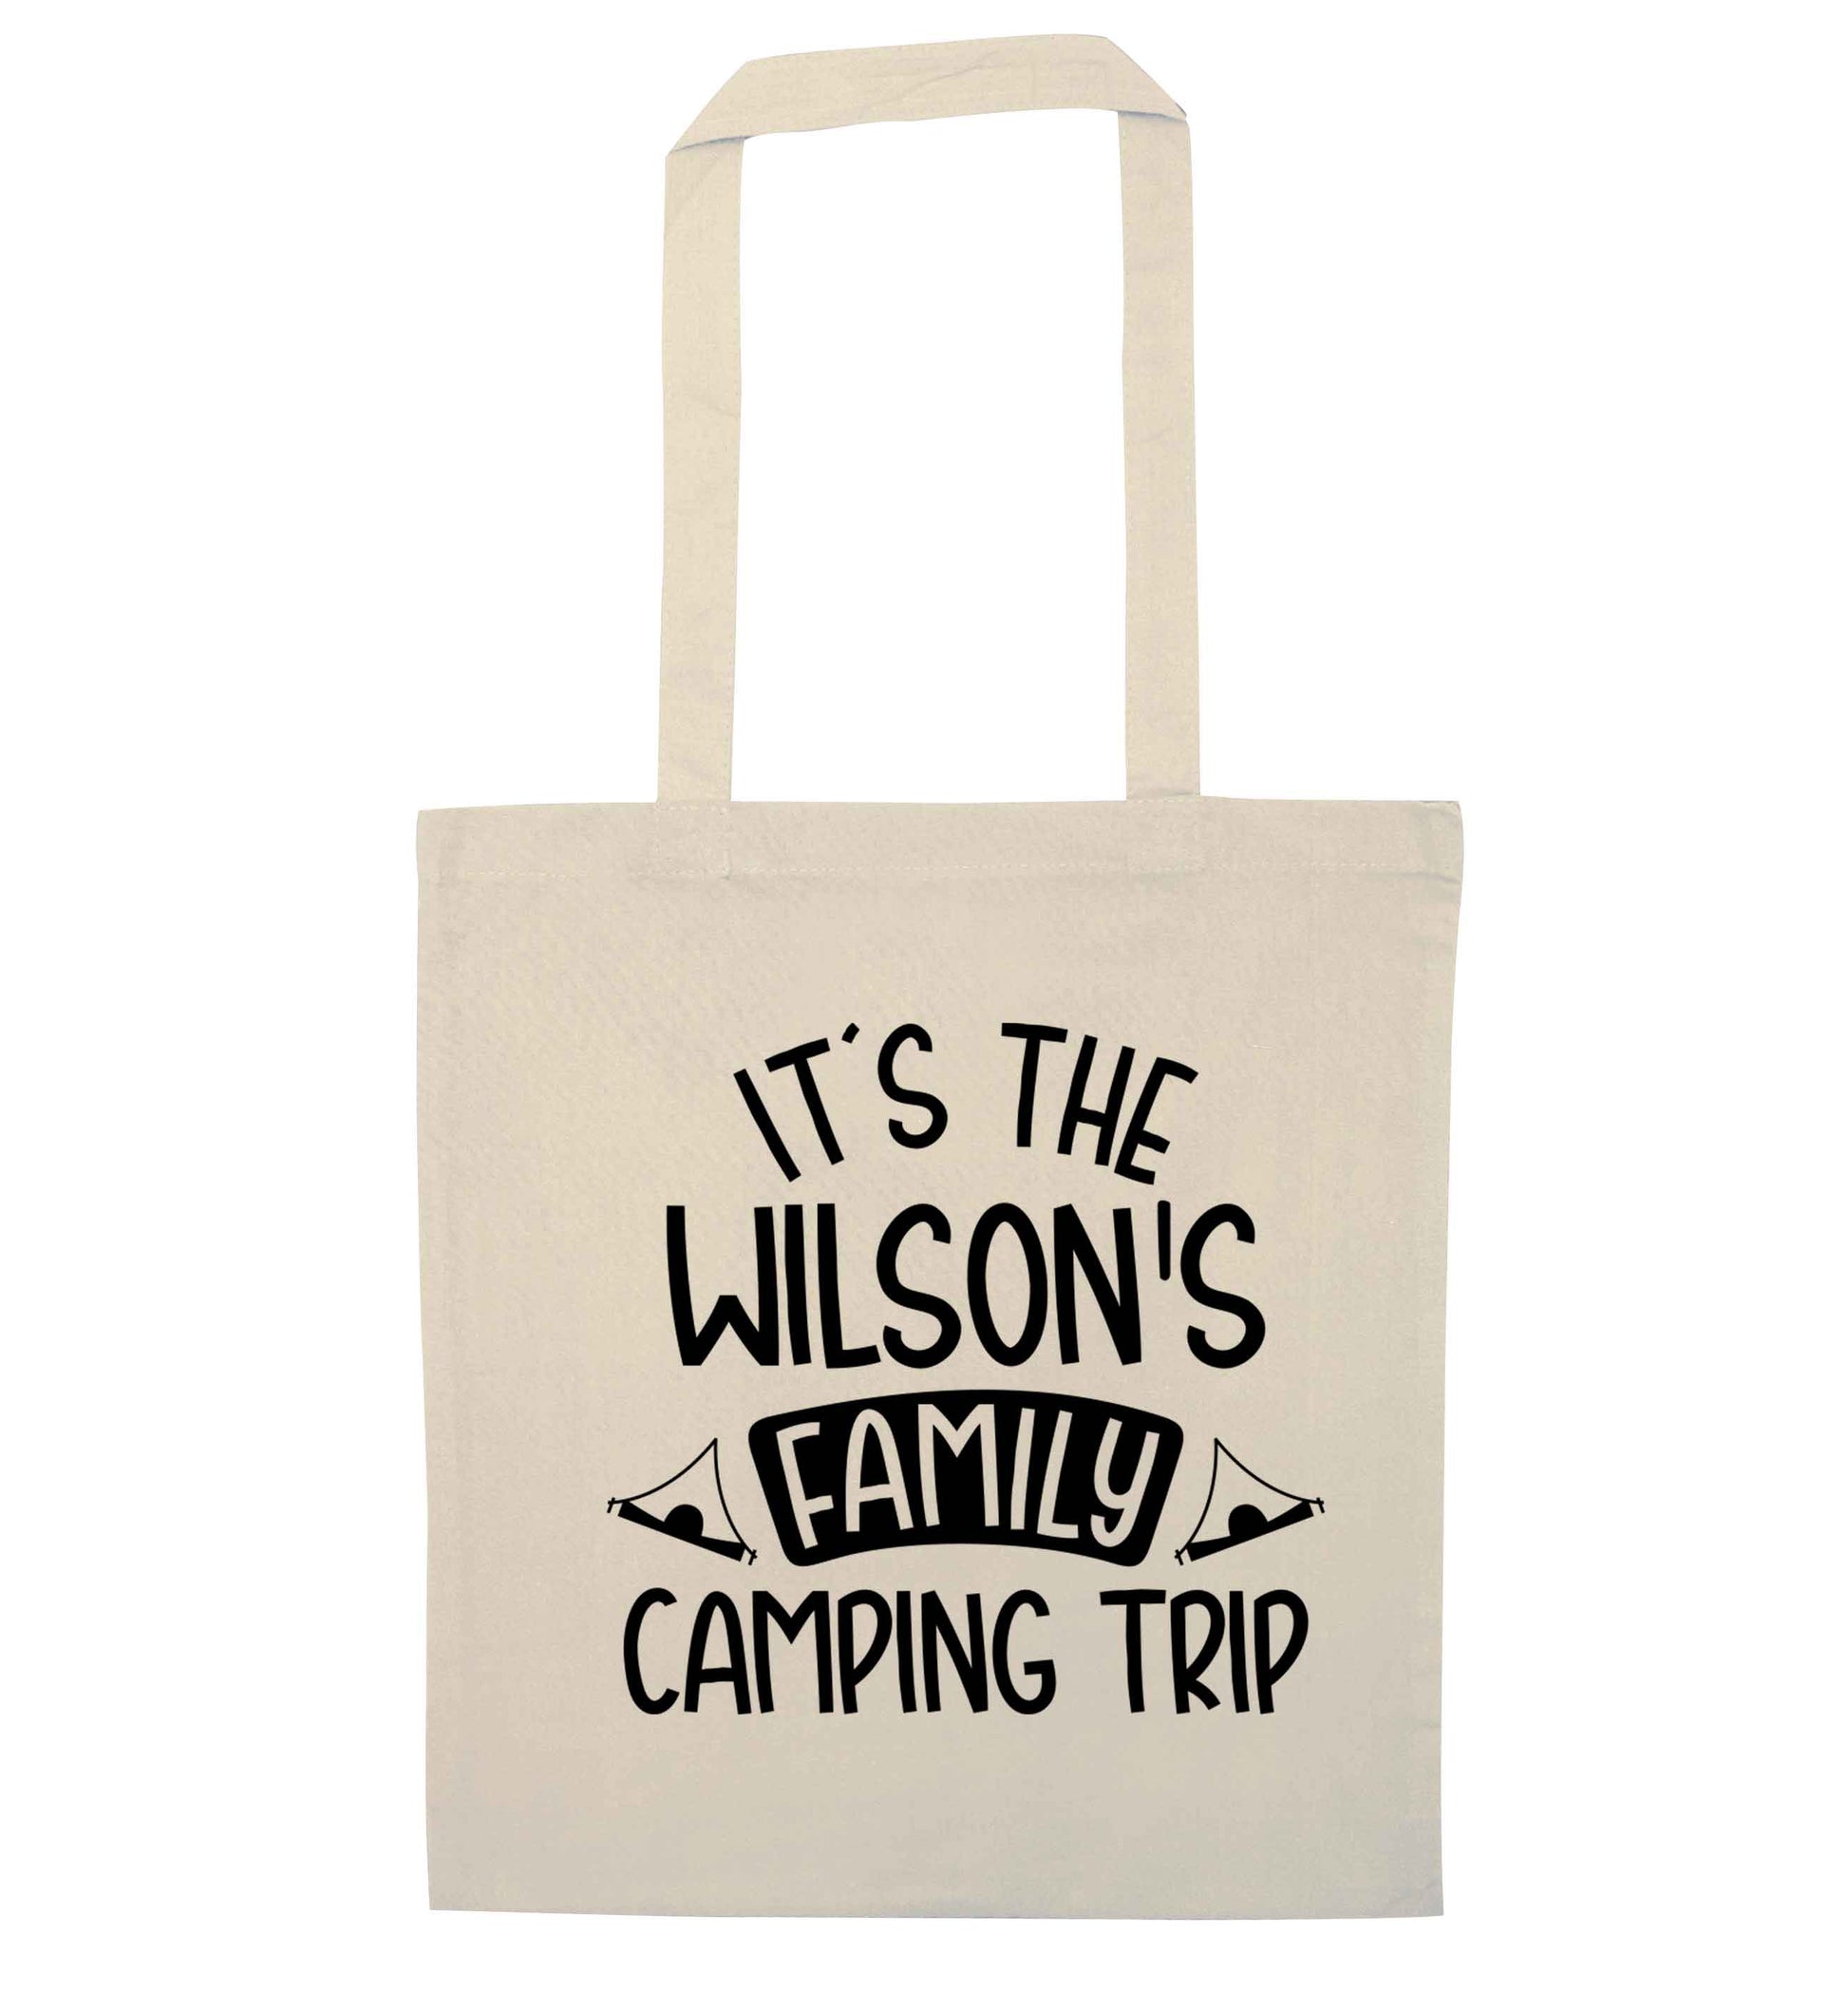 It's the Wilson's family camping trip personalised natural tote bag